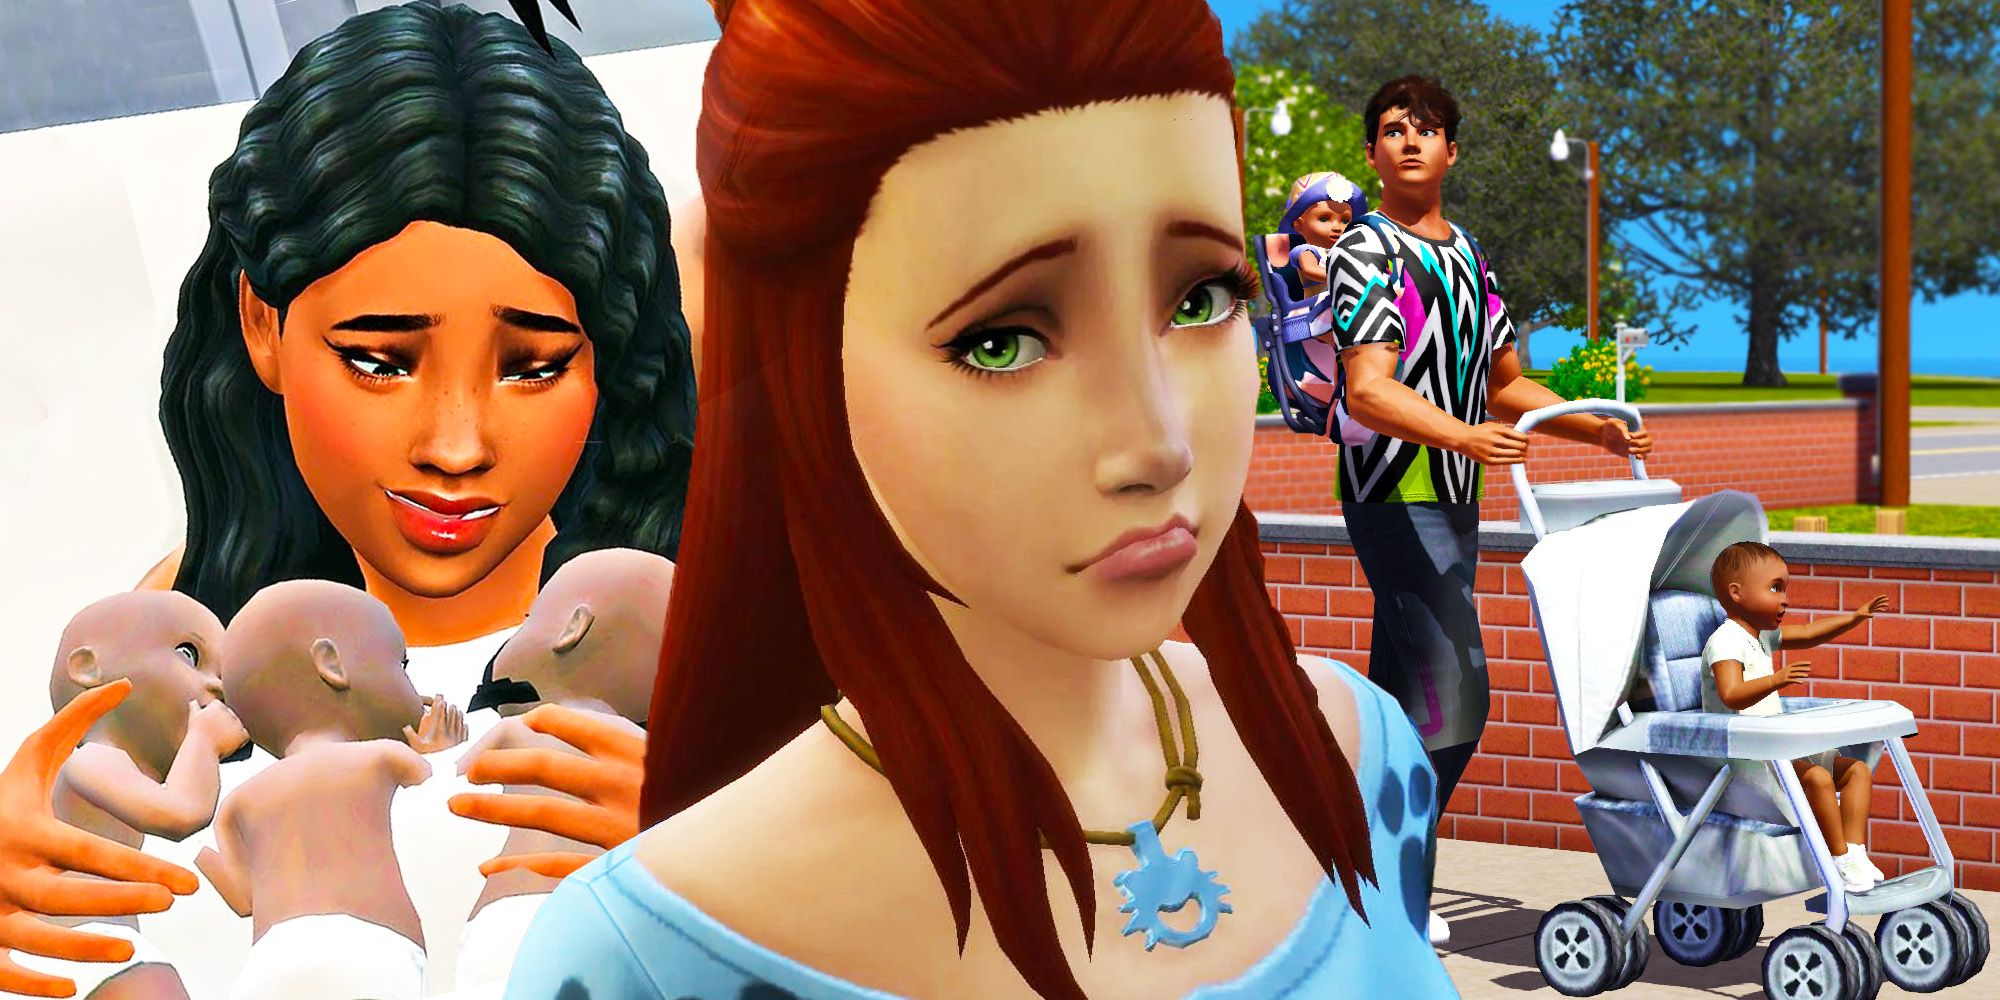 A Sims 4 Veteran Discovers Rare Achievement That Only A Fraction Of Simmers Will See